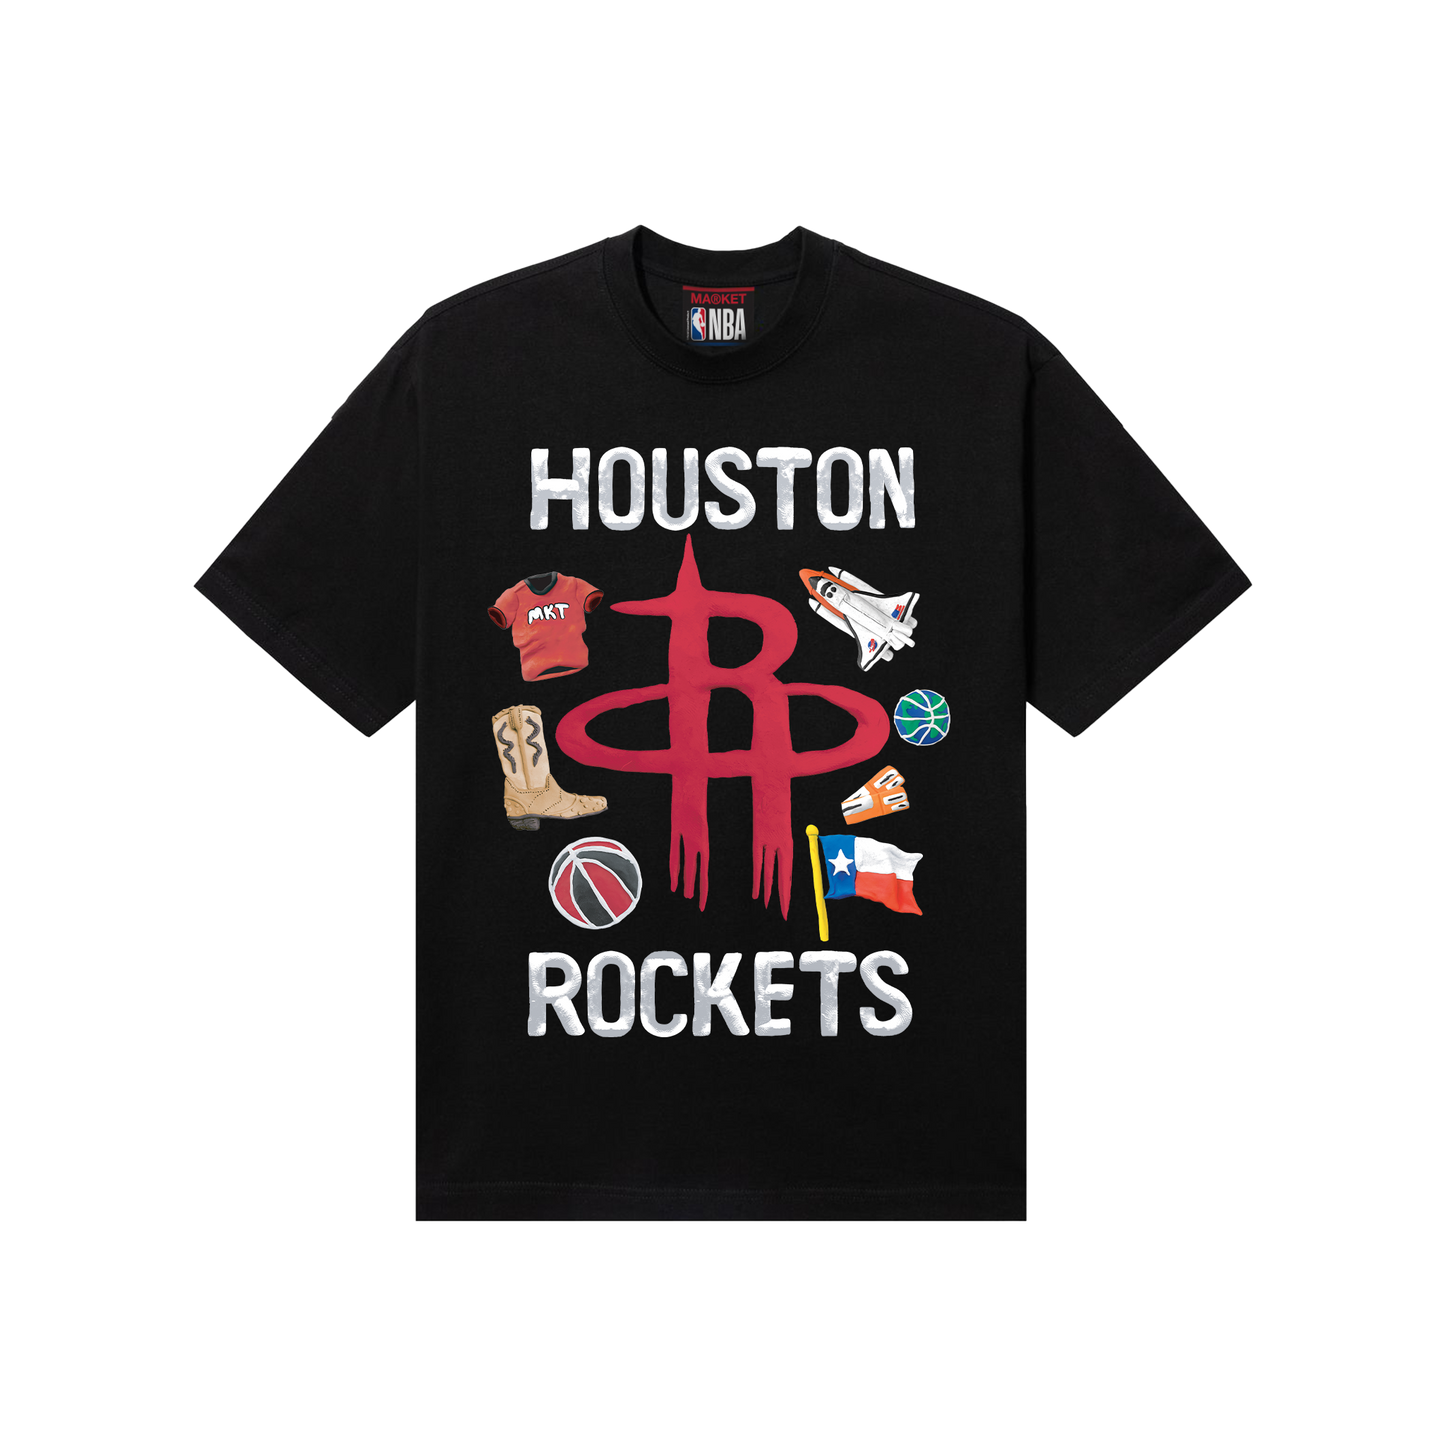 MARKET clothing brand MARKET ROCKETS T-SHIRT. Find more graphic tees, hats, hoodies and more at MarketStudios.com. Formally Chinatown Market.